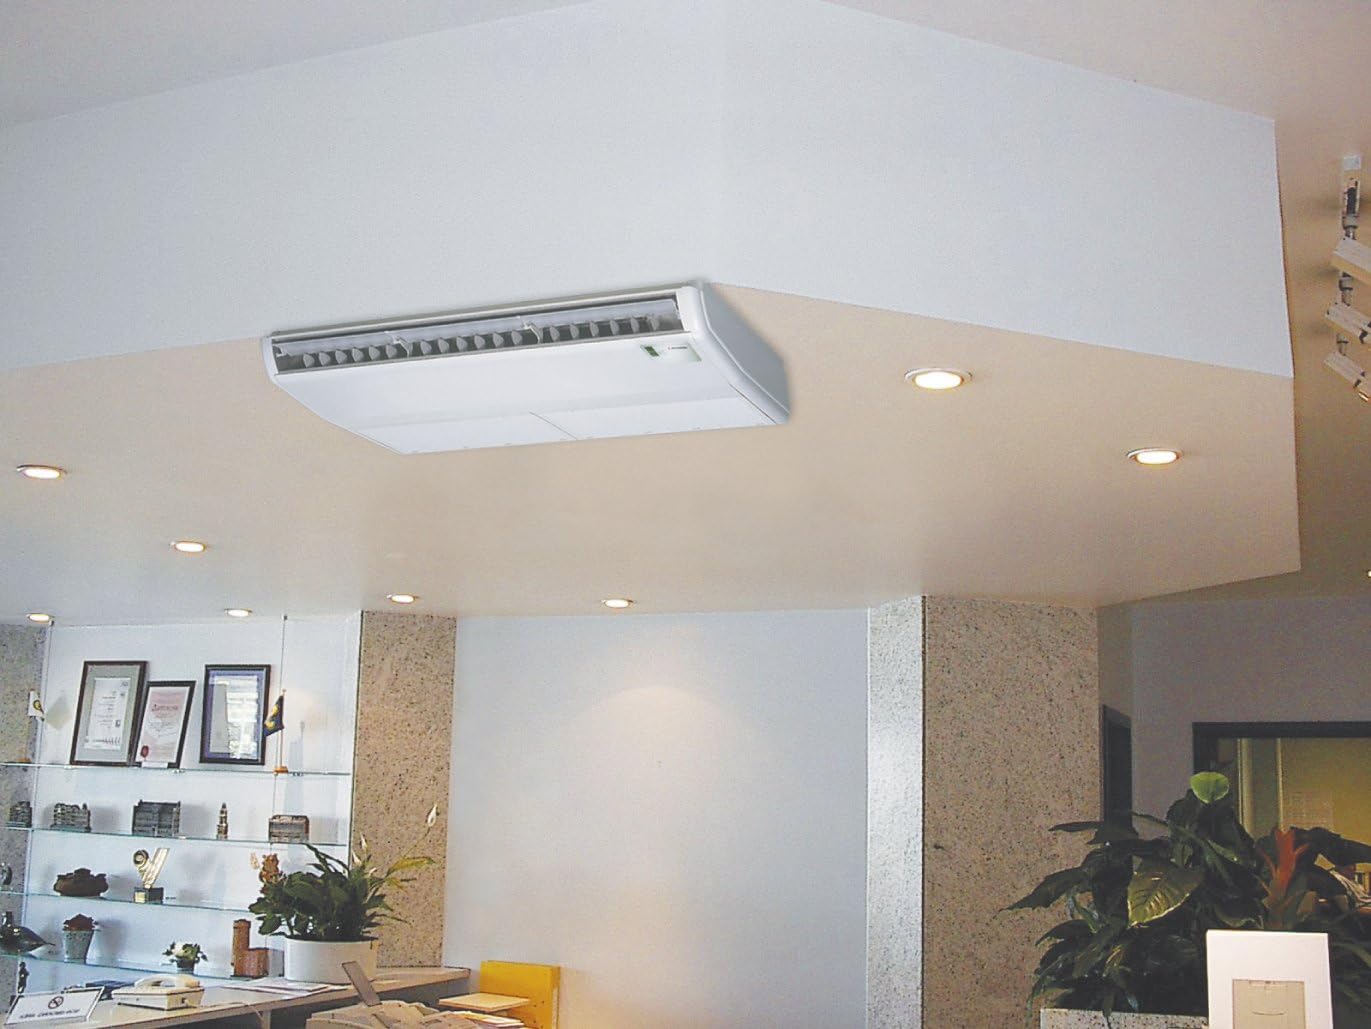 How Much Does A Ductless AC Cost